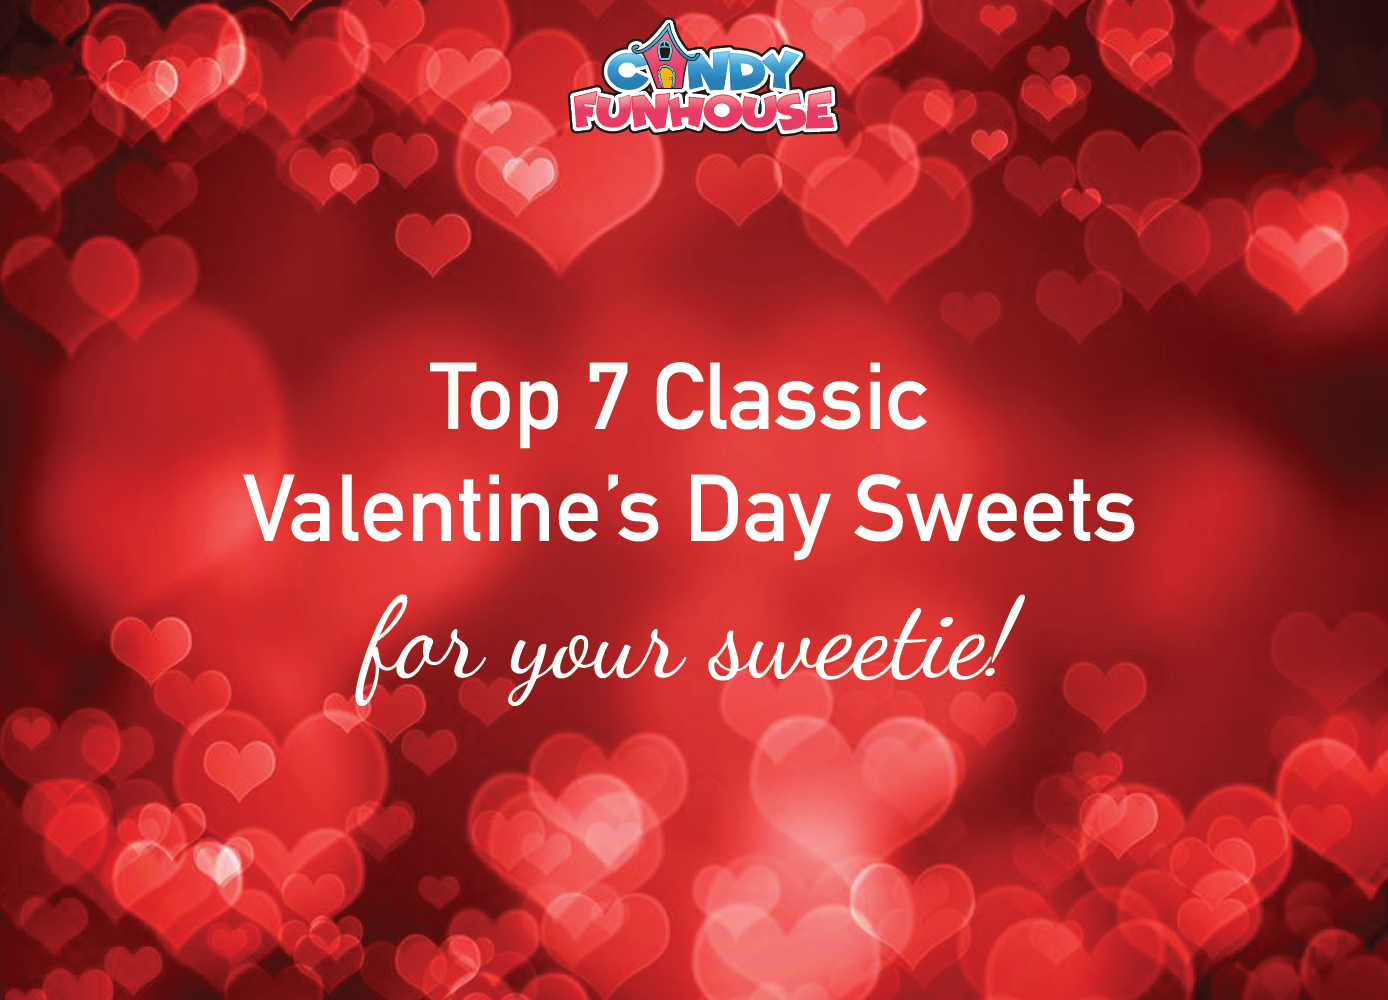 Top 7 Classic Valentine's Sweets for Your Sweetie